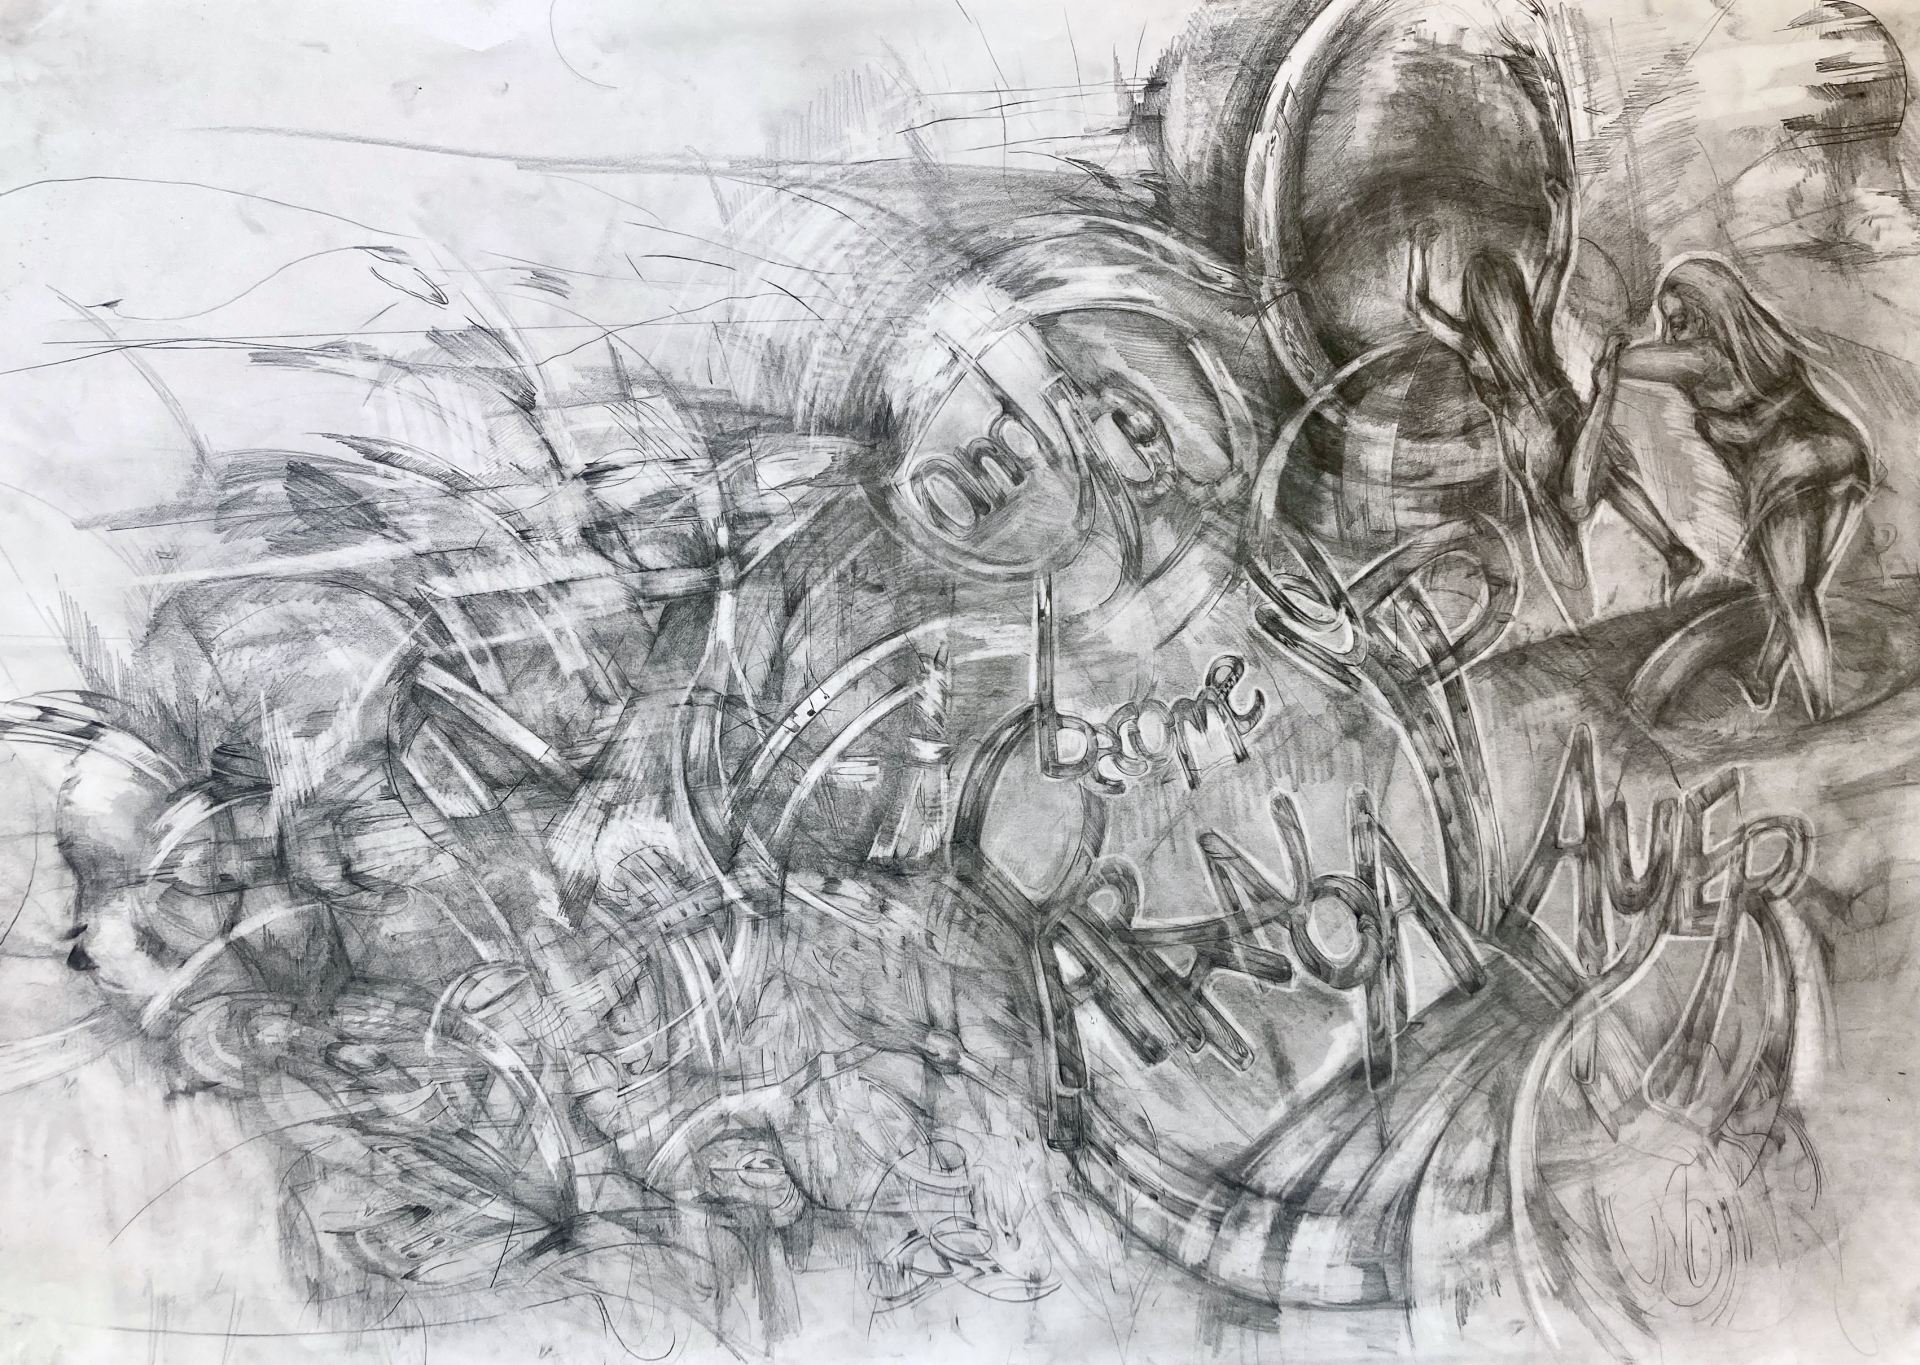 An abstract pencil drawing on paper.